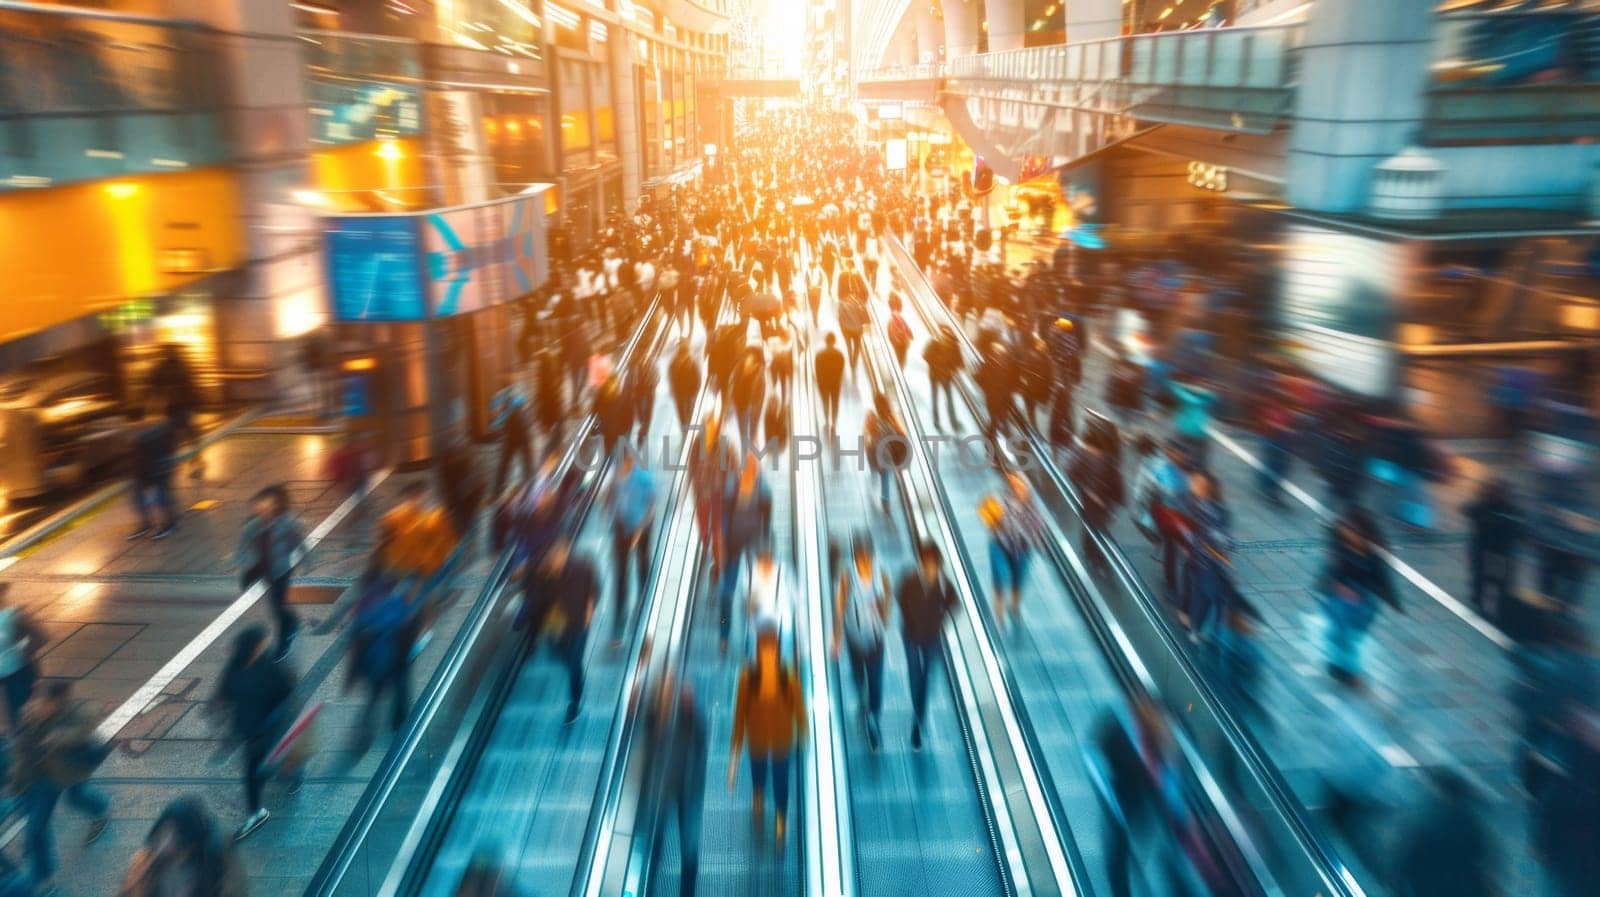 A blurry image of a busy city street with people walking